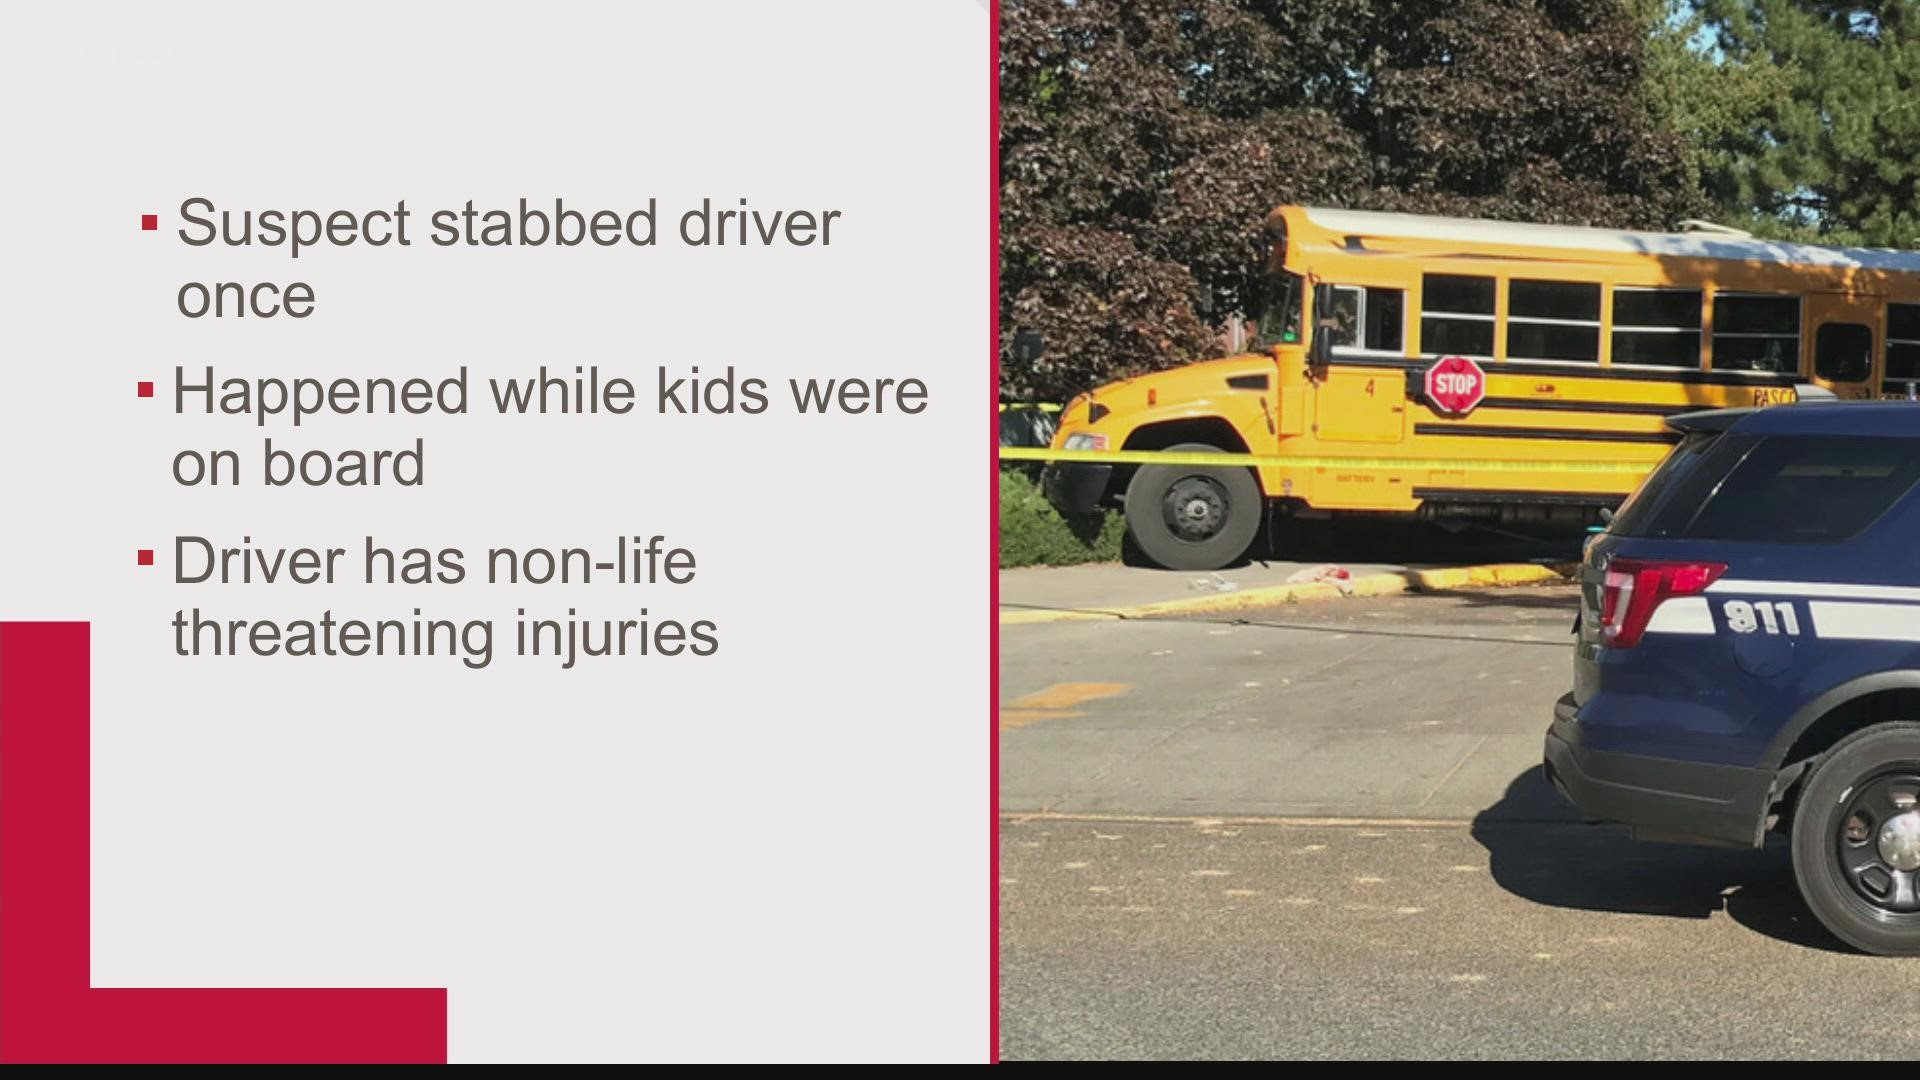 During the attack, the school bus jumped a curb and crashed into nearby hedges, according to police.